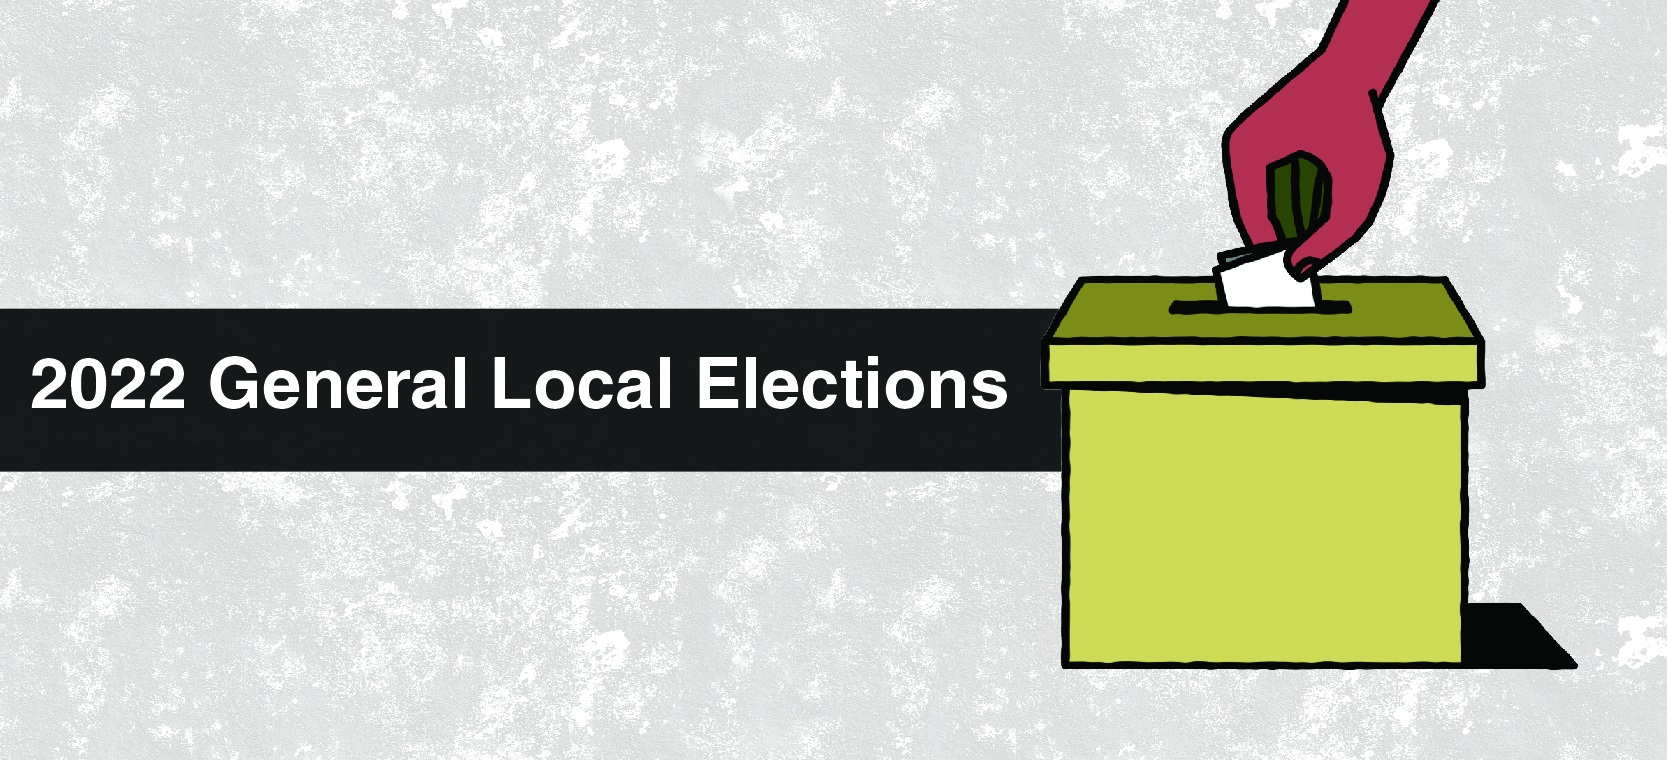 The 2022 General Local Elections were held on October 15. We administer campaign financing, disclosure and election advertising rules in local elections.